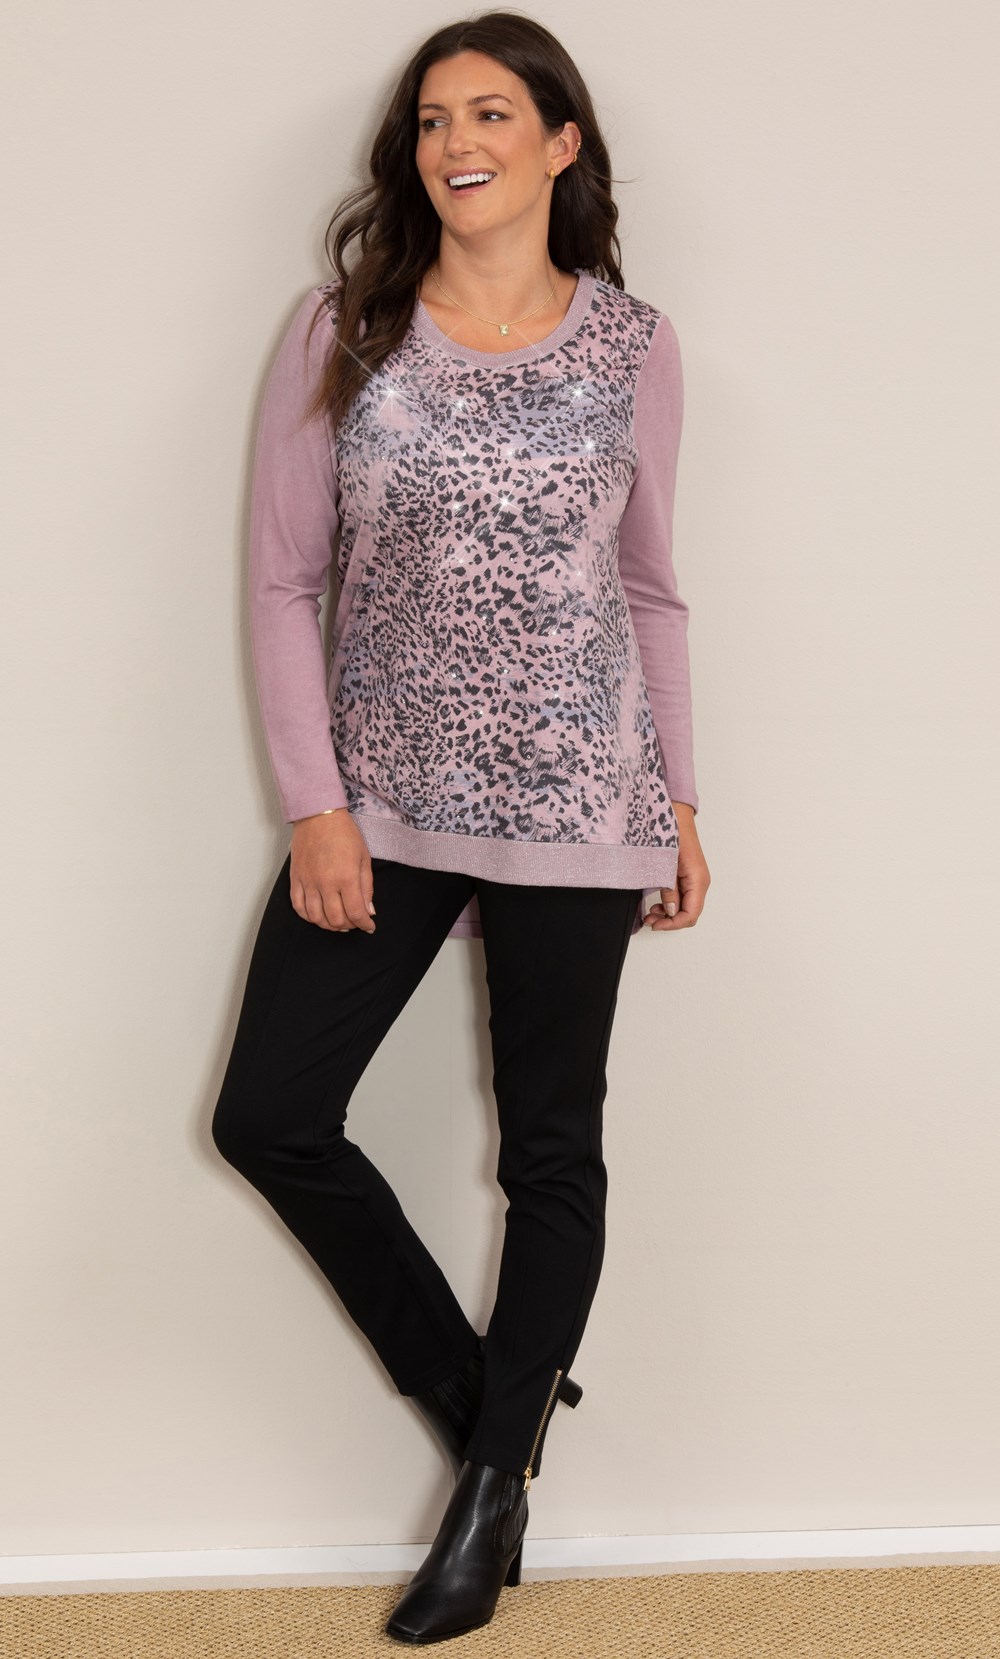 Embellished Animal Print Knitted Top